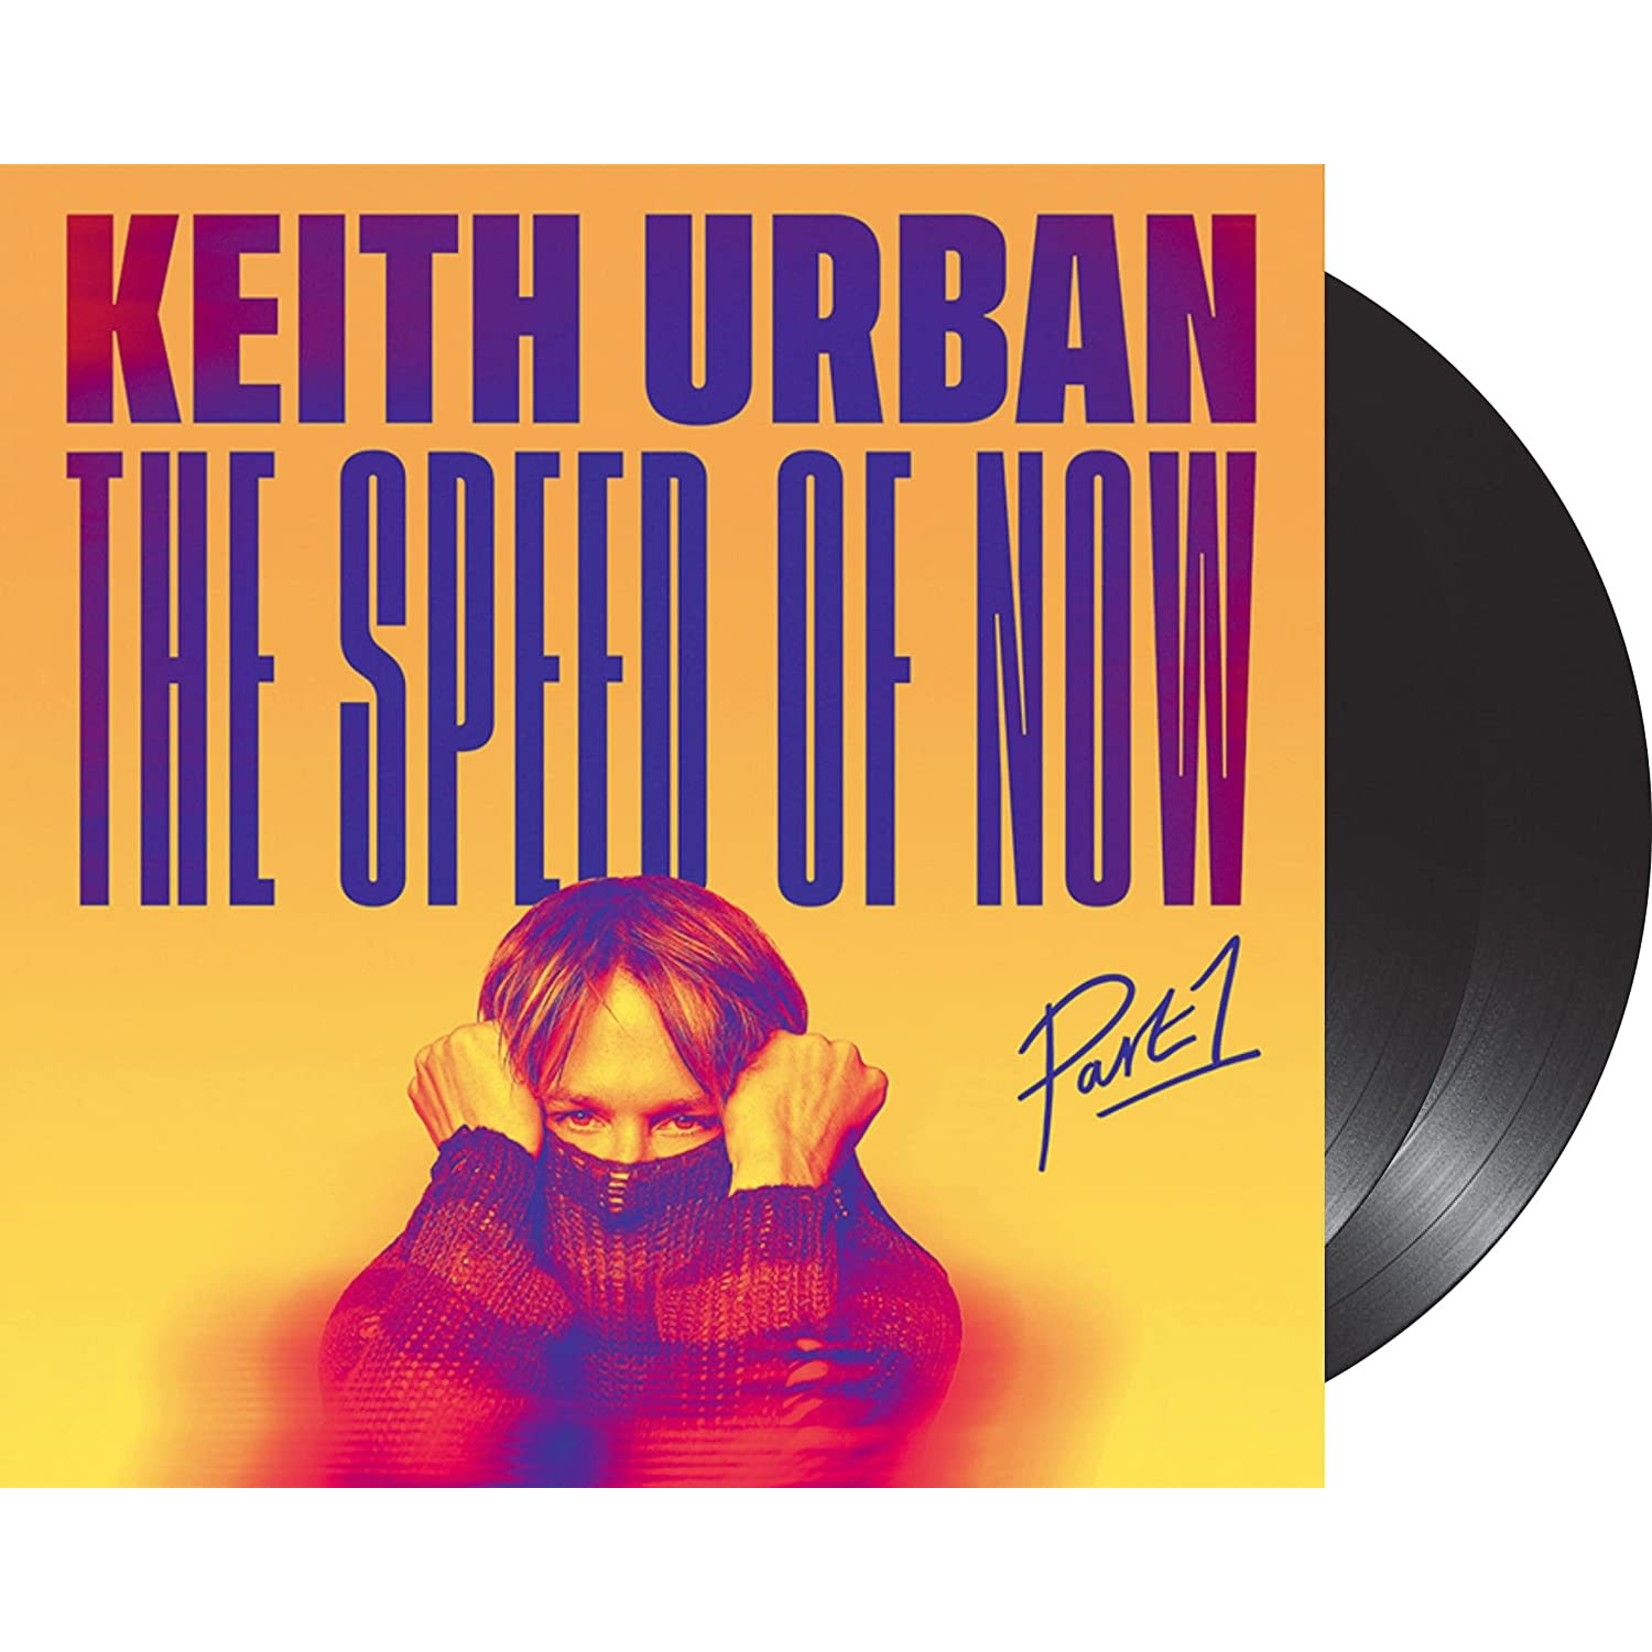 Keith Urban - The Speed Of Now Part 1 [LP]